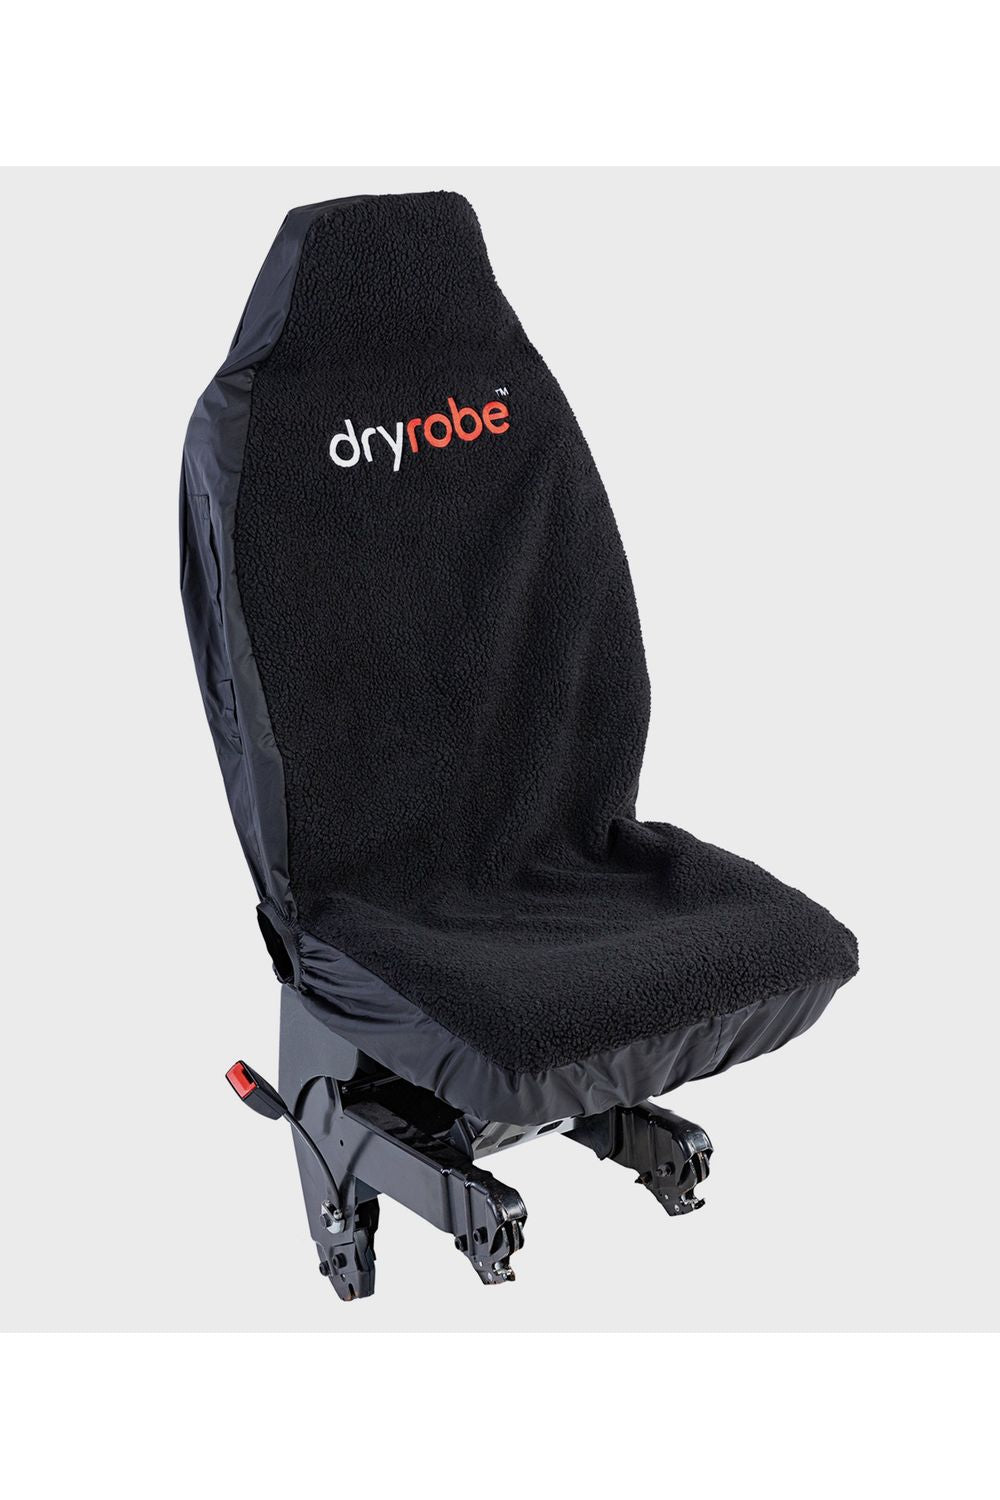 Dryrobe Carseat Cover Black